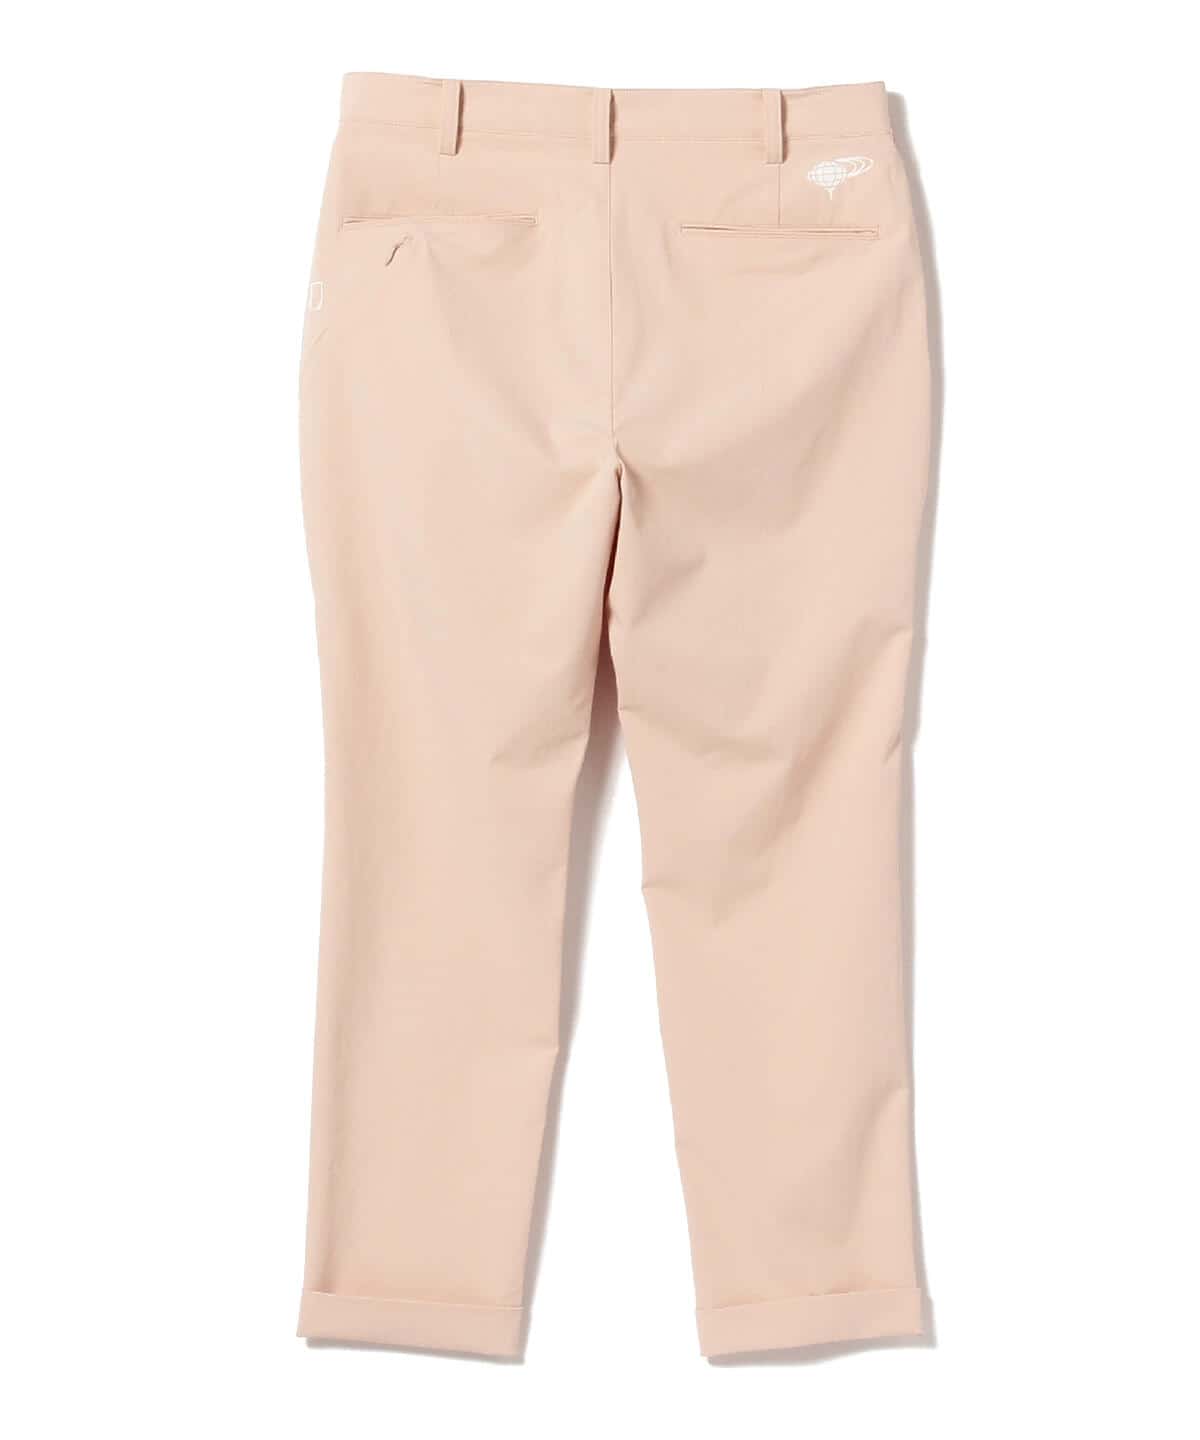 [Outlet] BEAMS GOLF ORANGE LABEL / Dry Stretch Cropped Pants